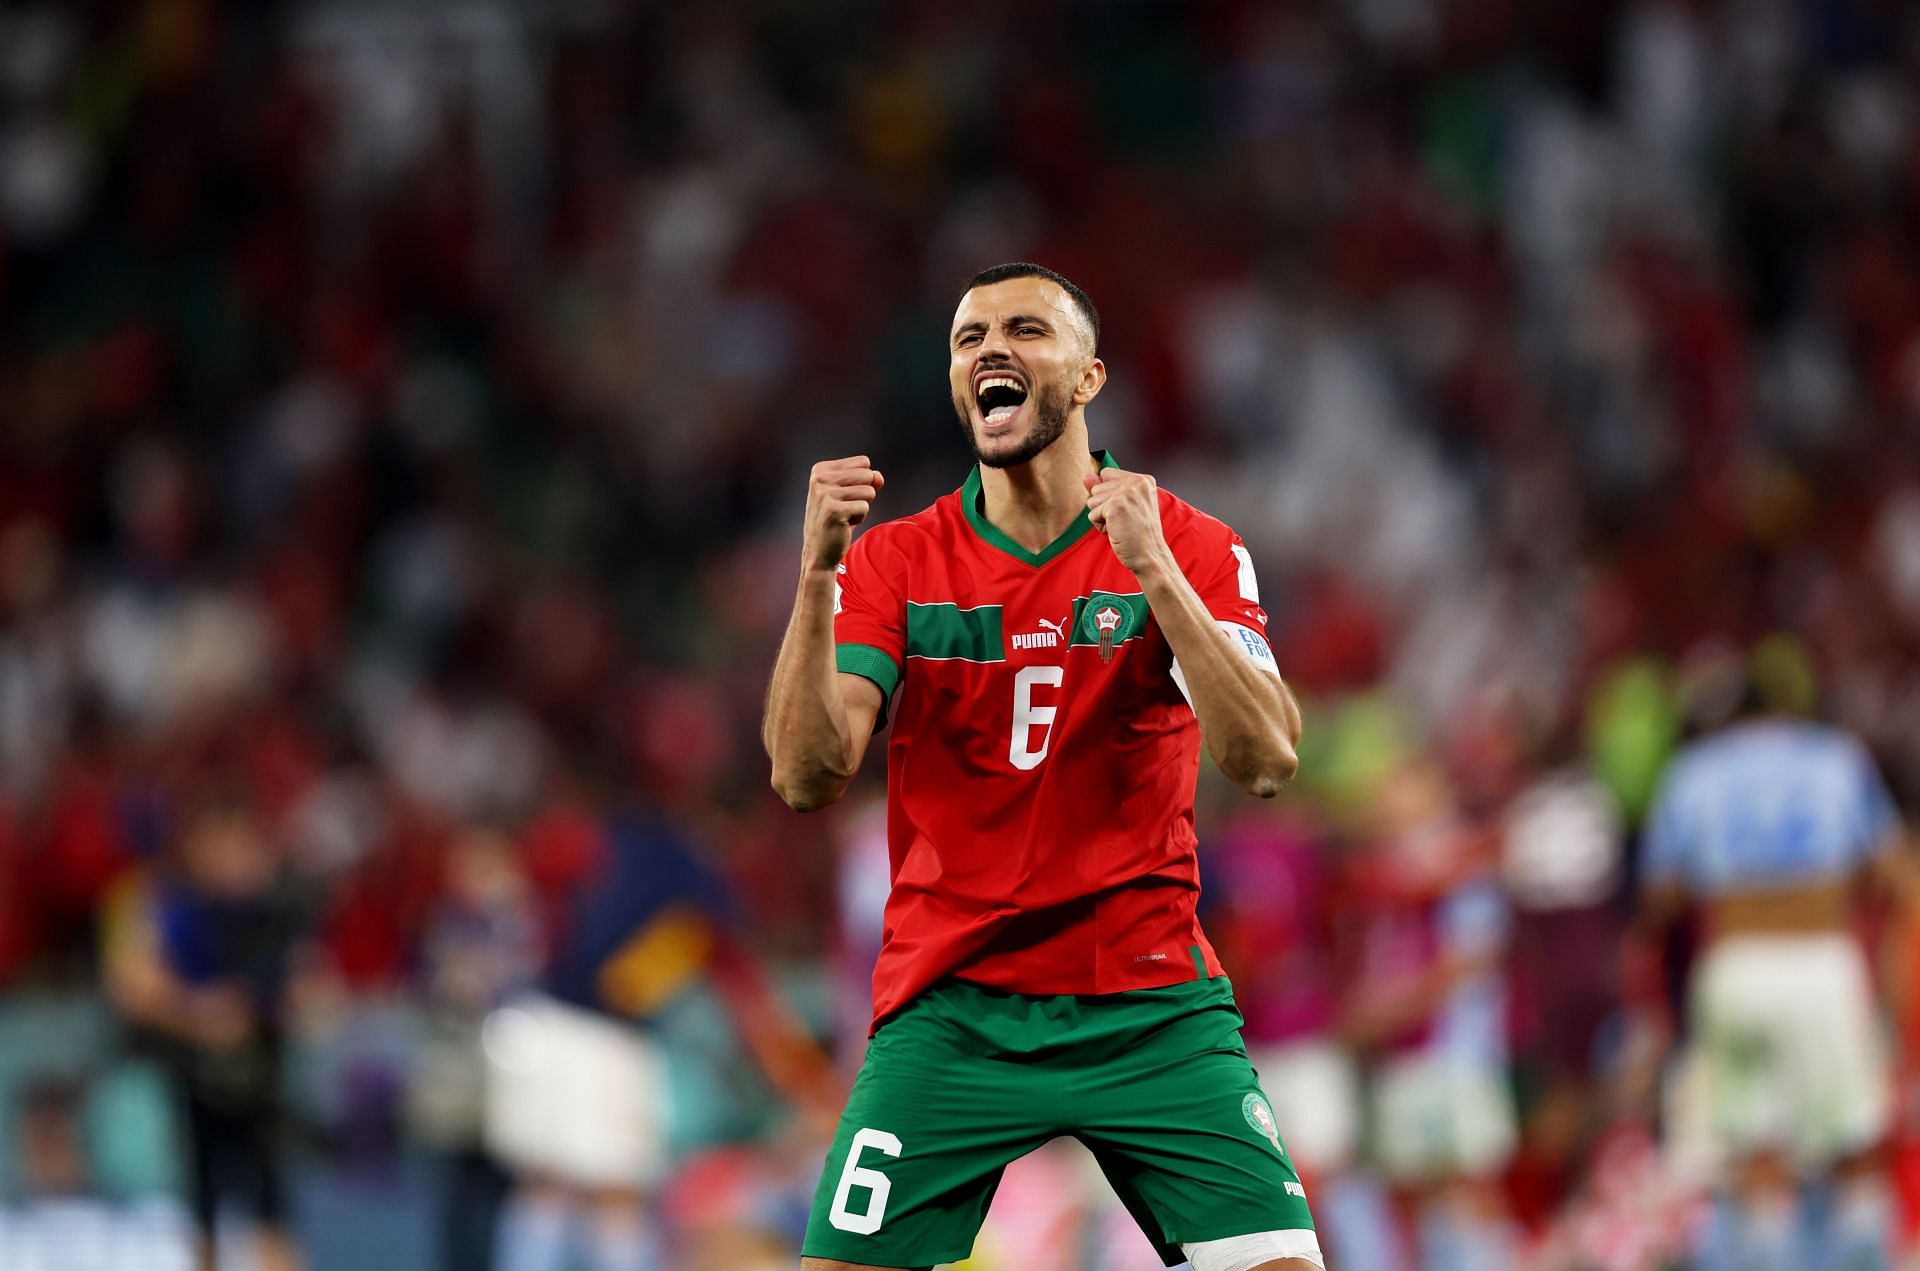 Romain Saiss guided Morocco to an unbelievable semifinal run at the 2022 FIFA World Cup